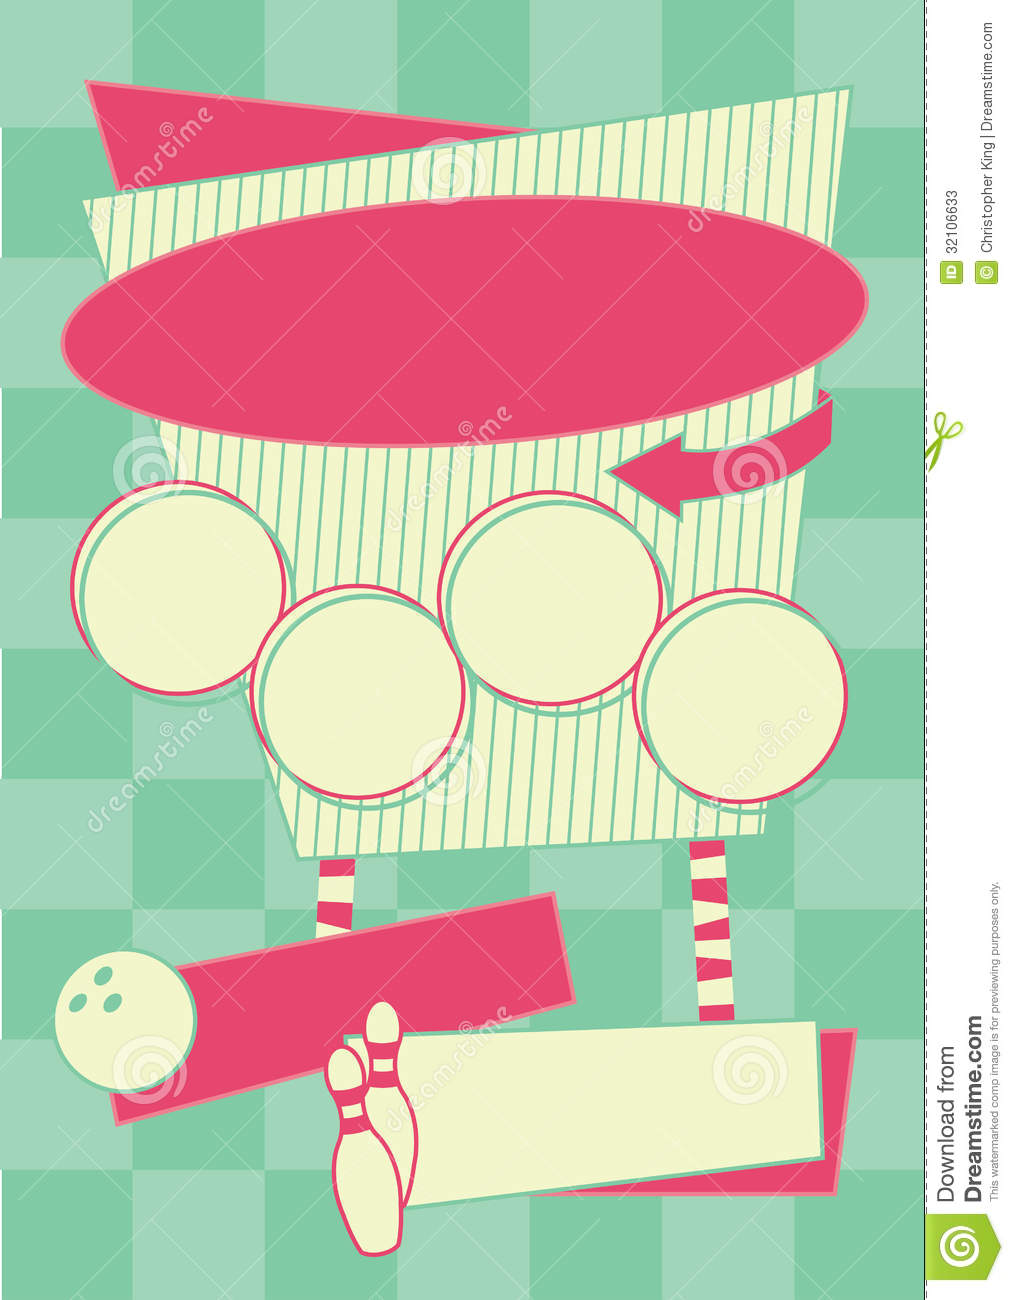 1950s Bowling Style Background And Frame Stock Photos   Image